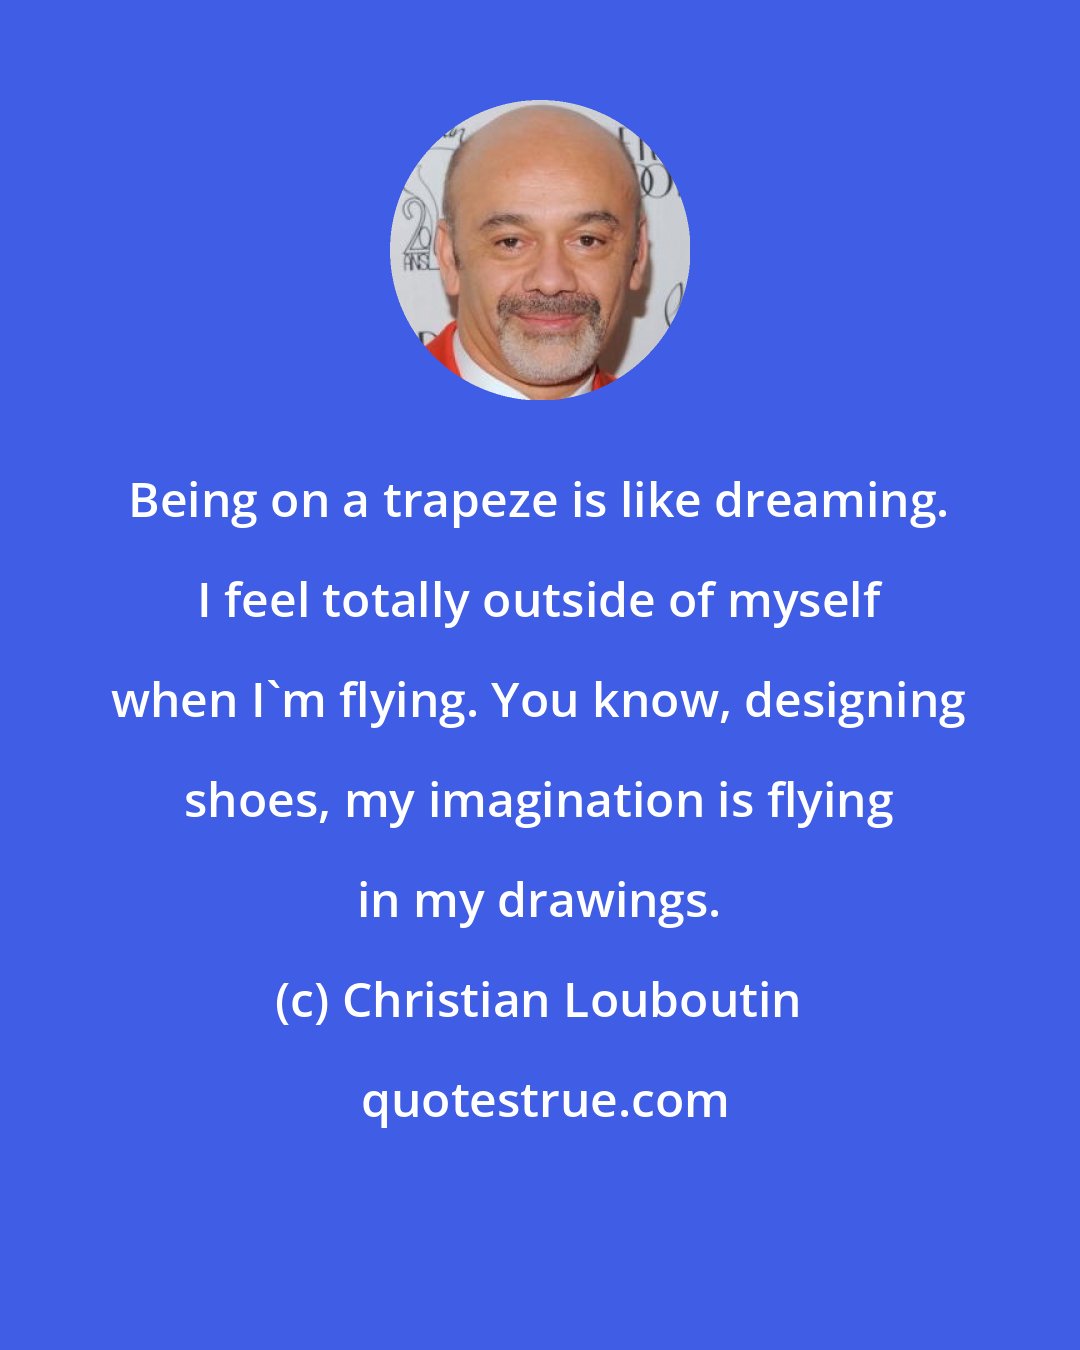 Christian Louboutin: Being on a trapeze is like dreaming. I feel totally outside of myself when I'm flying. You know, designing shoes, my imagination is flying in my drawings.